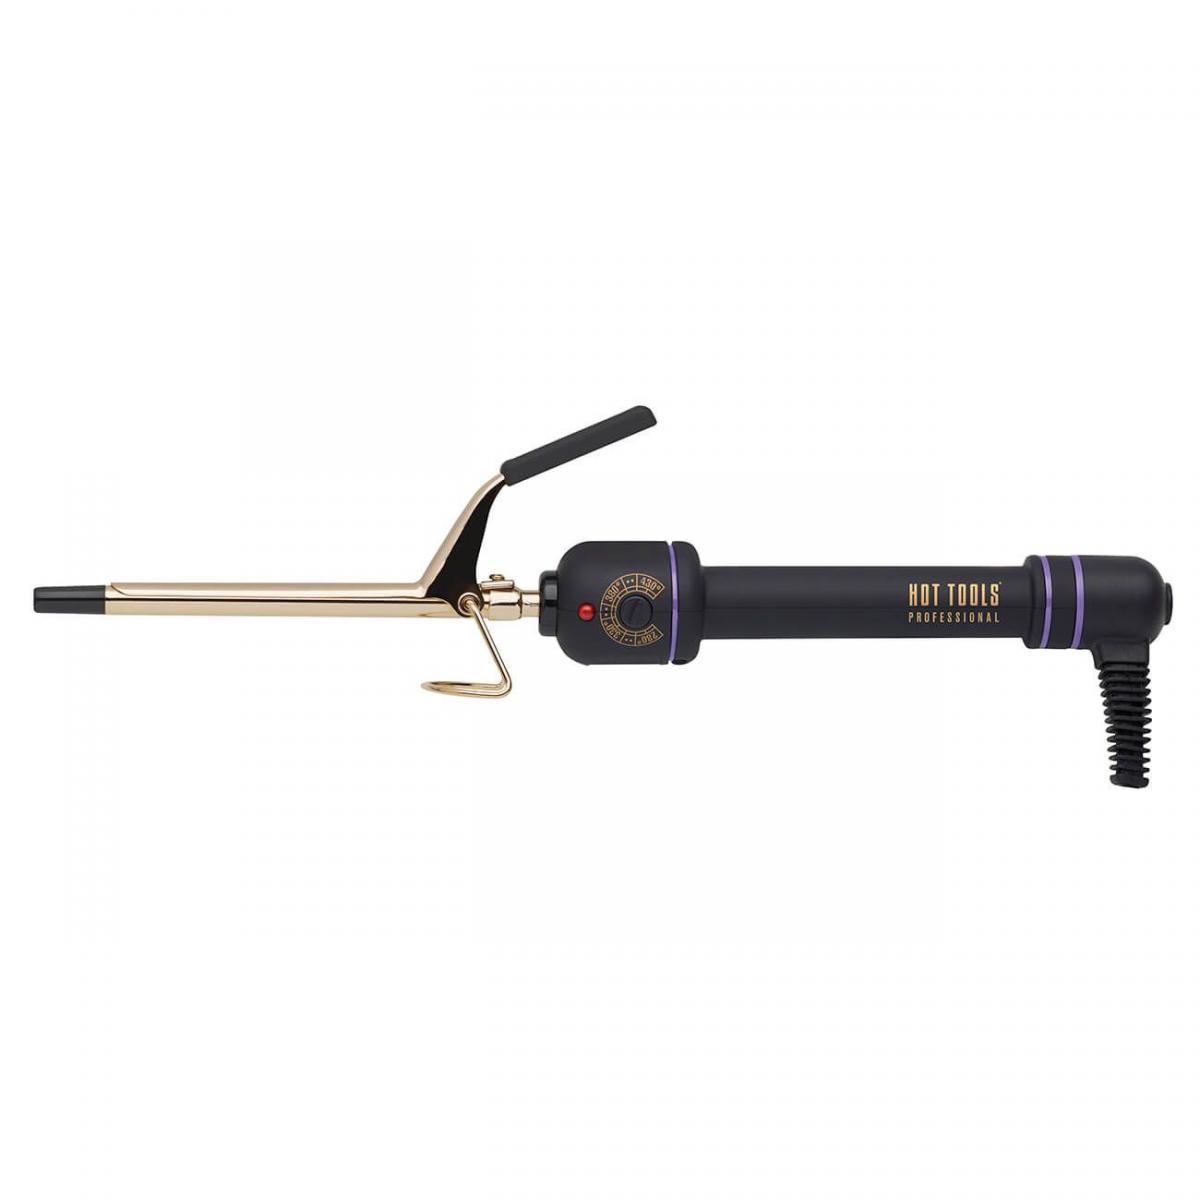 Hot Tools 24K Gold Salon Curling Iron, 19mm - Hairsale.se